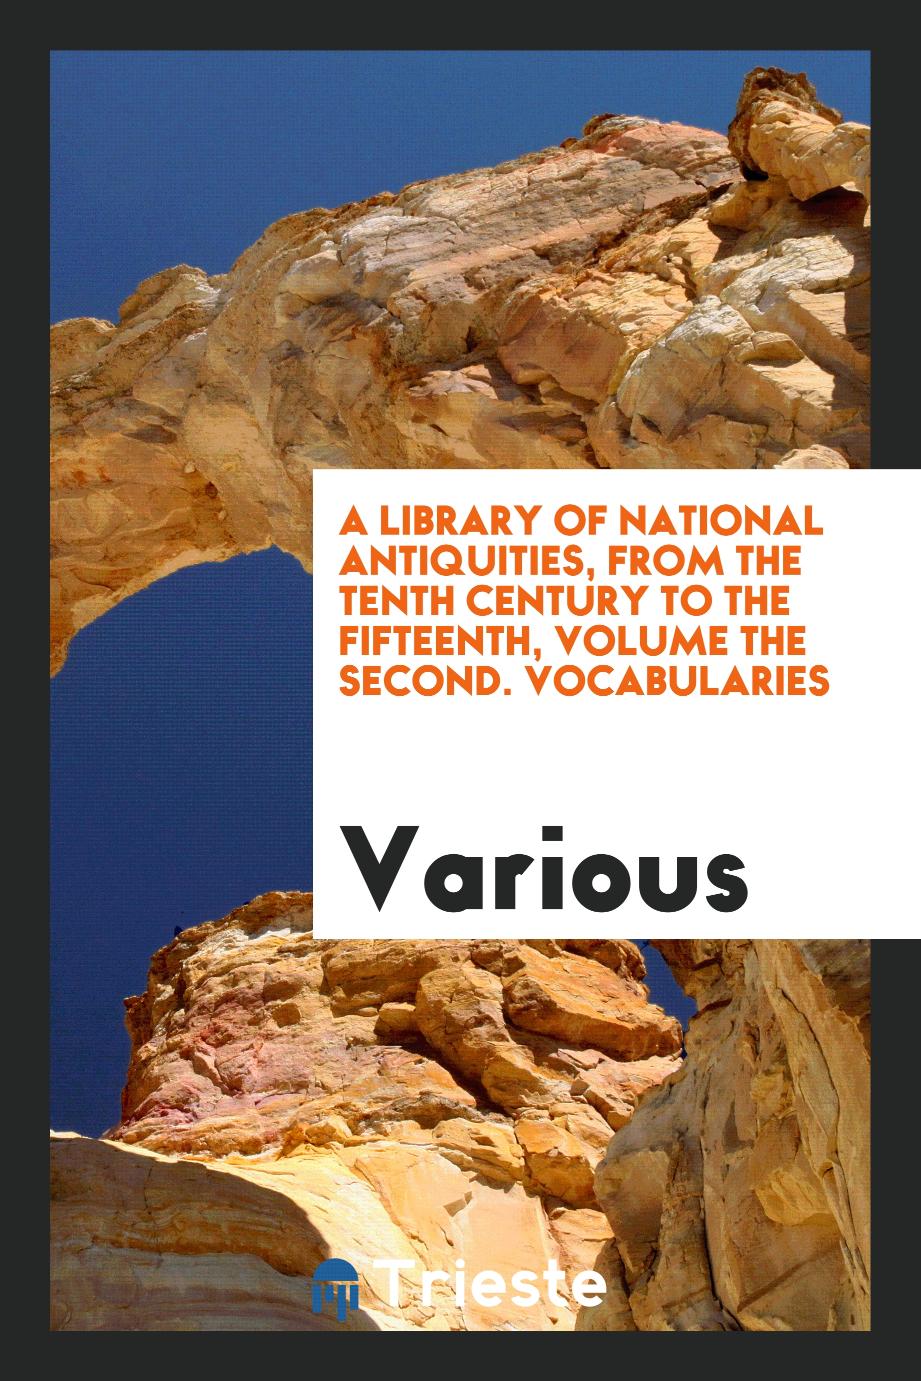 A Library of National Antiquities, from the Tenth Century to the Fifteenth, Volume the Second. Vocabularies